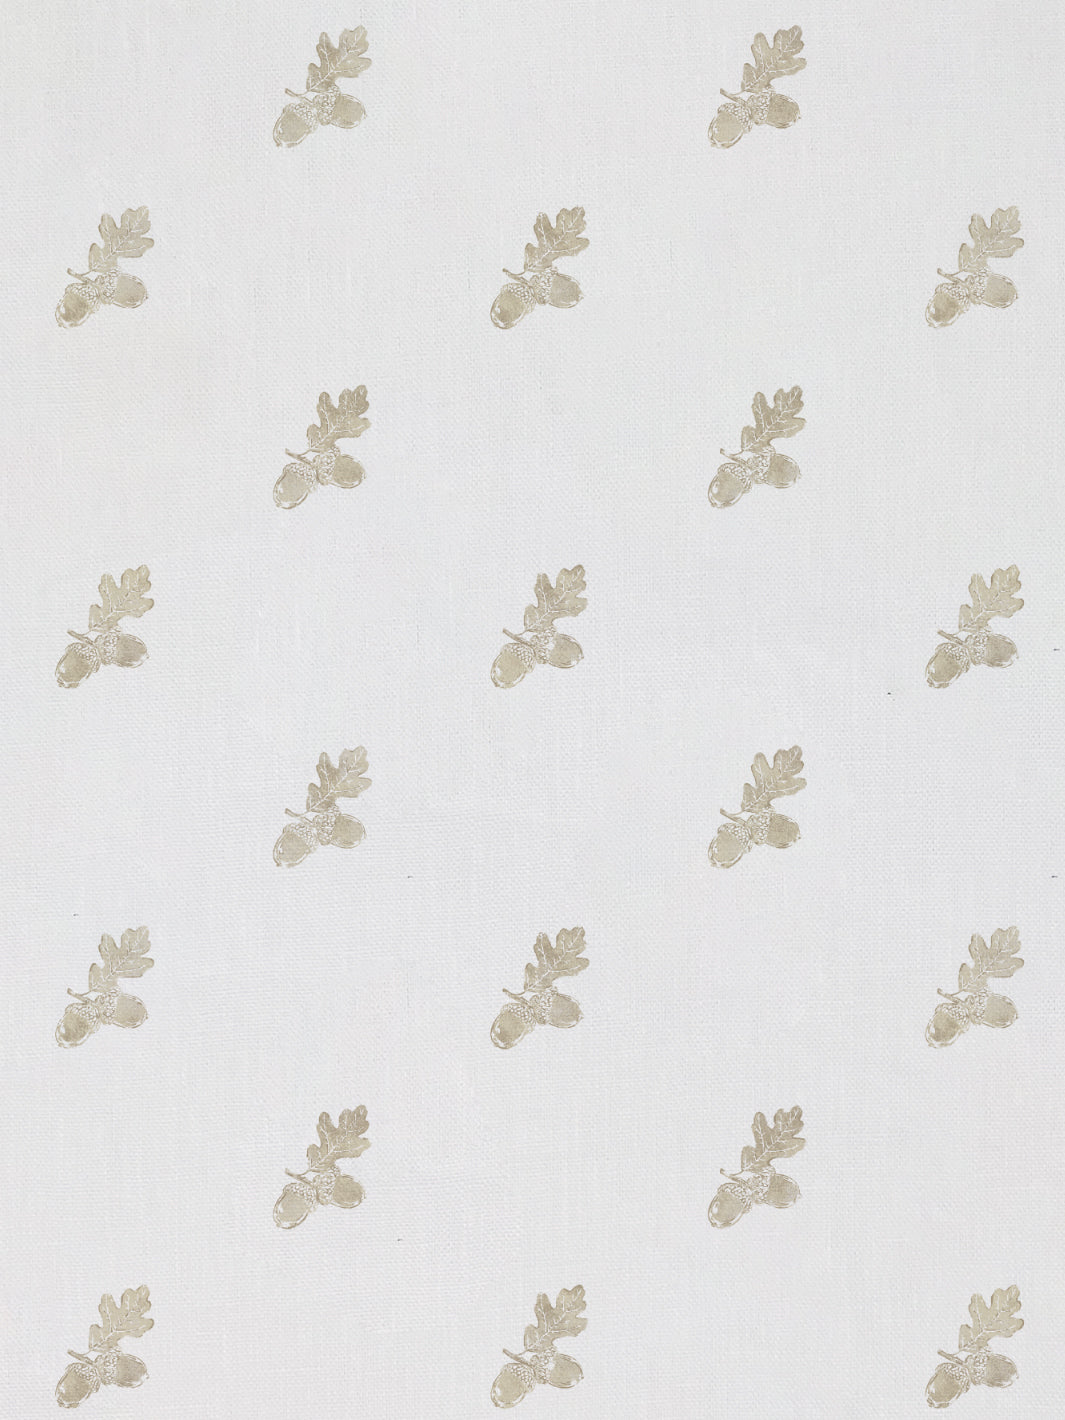 'Valley Acorn' Linen Fabric by Nathan Turner - Neutral